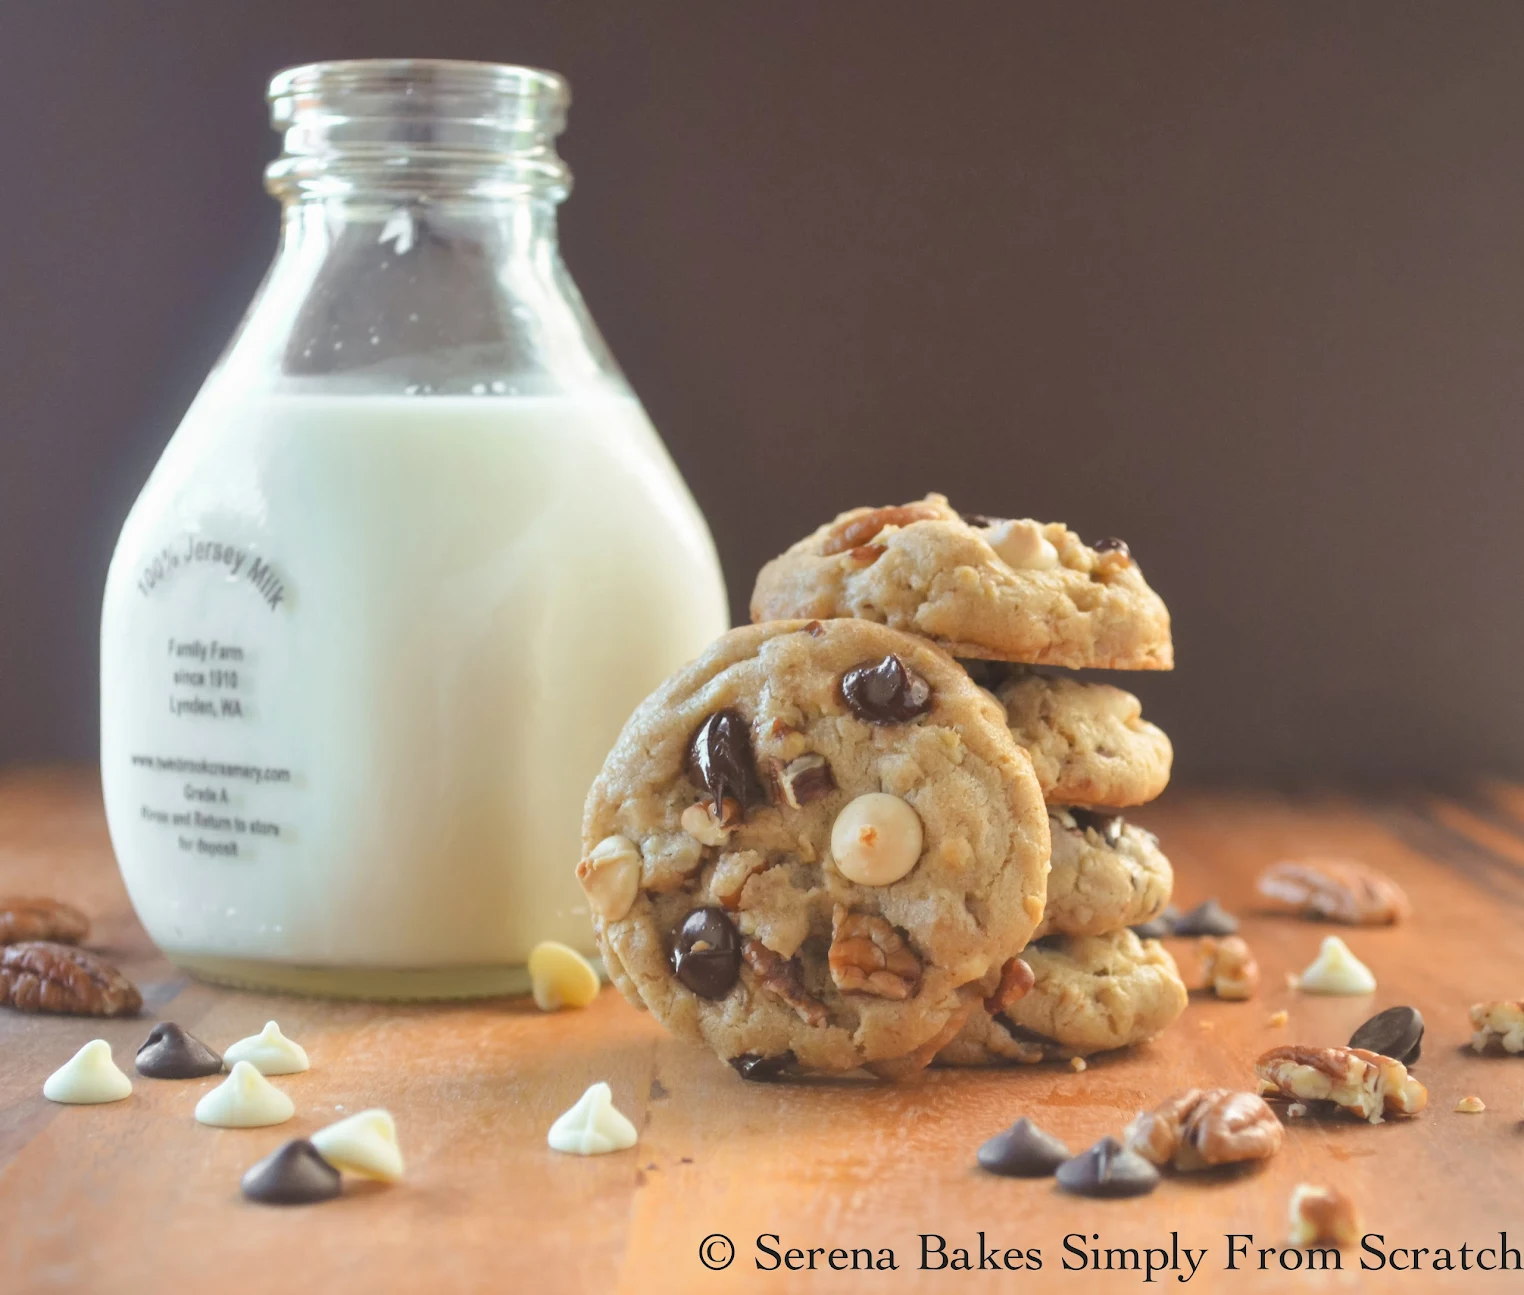 I Want To Marry You Chocolate Chip Cookies with Milk: Serena Bakes Simply From Scratch